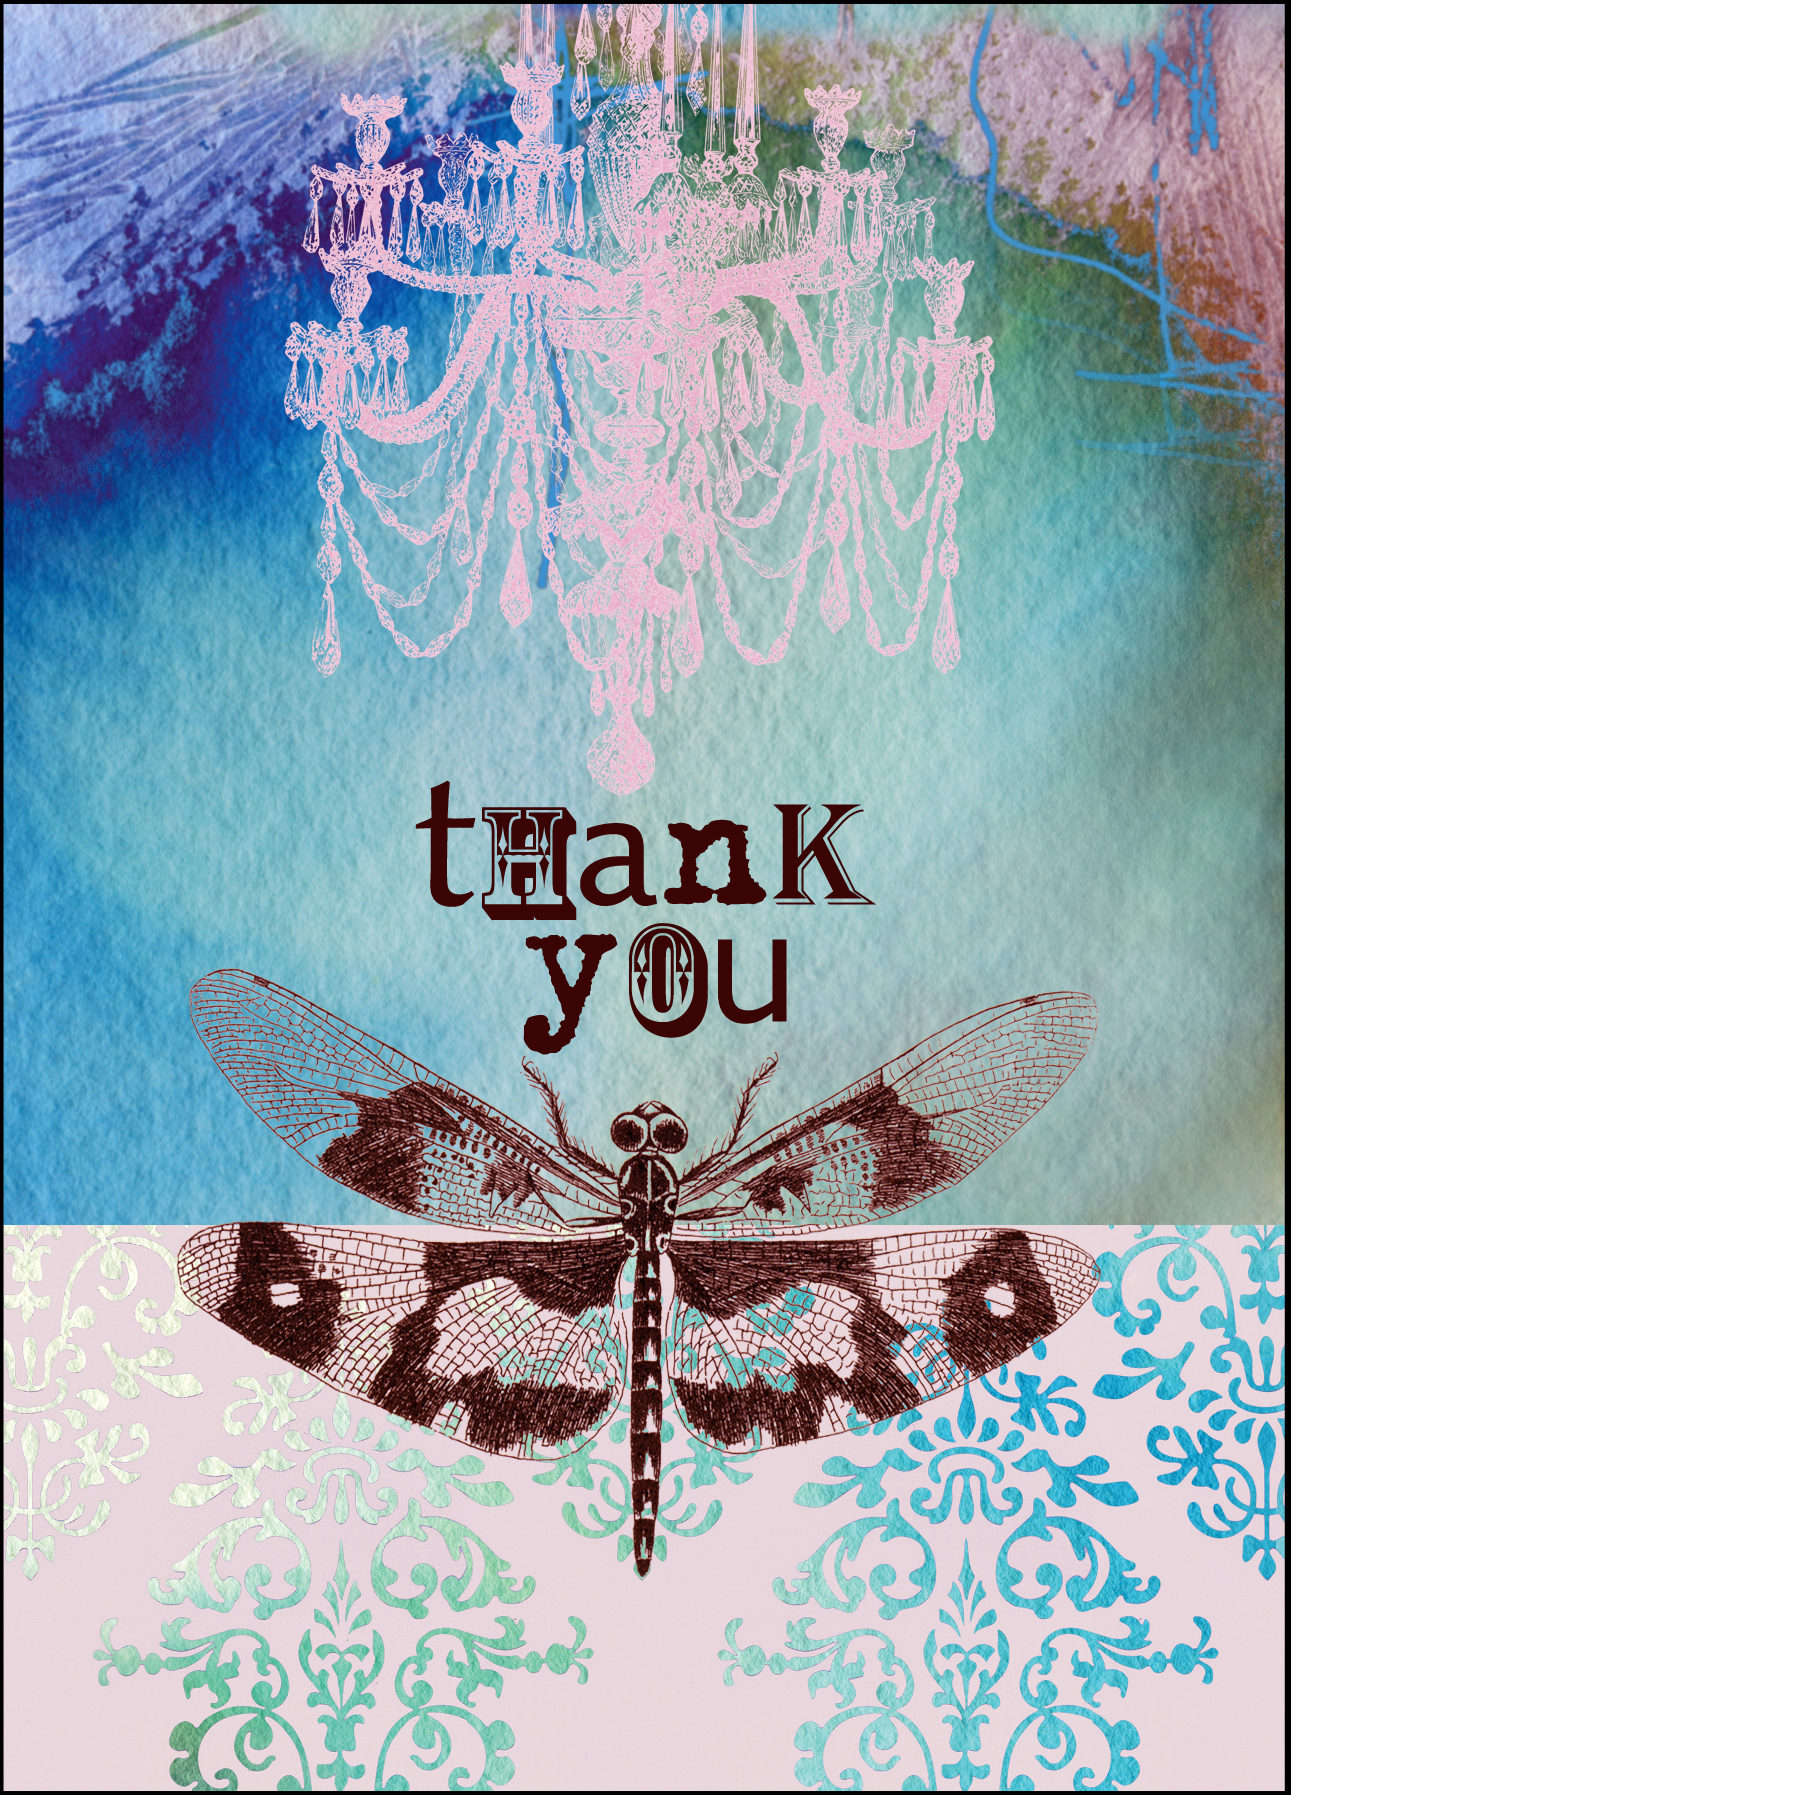 Gabriela Szulman collage greeting card "thank you" chandelier & dragonfly turquoise pink